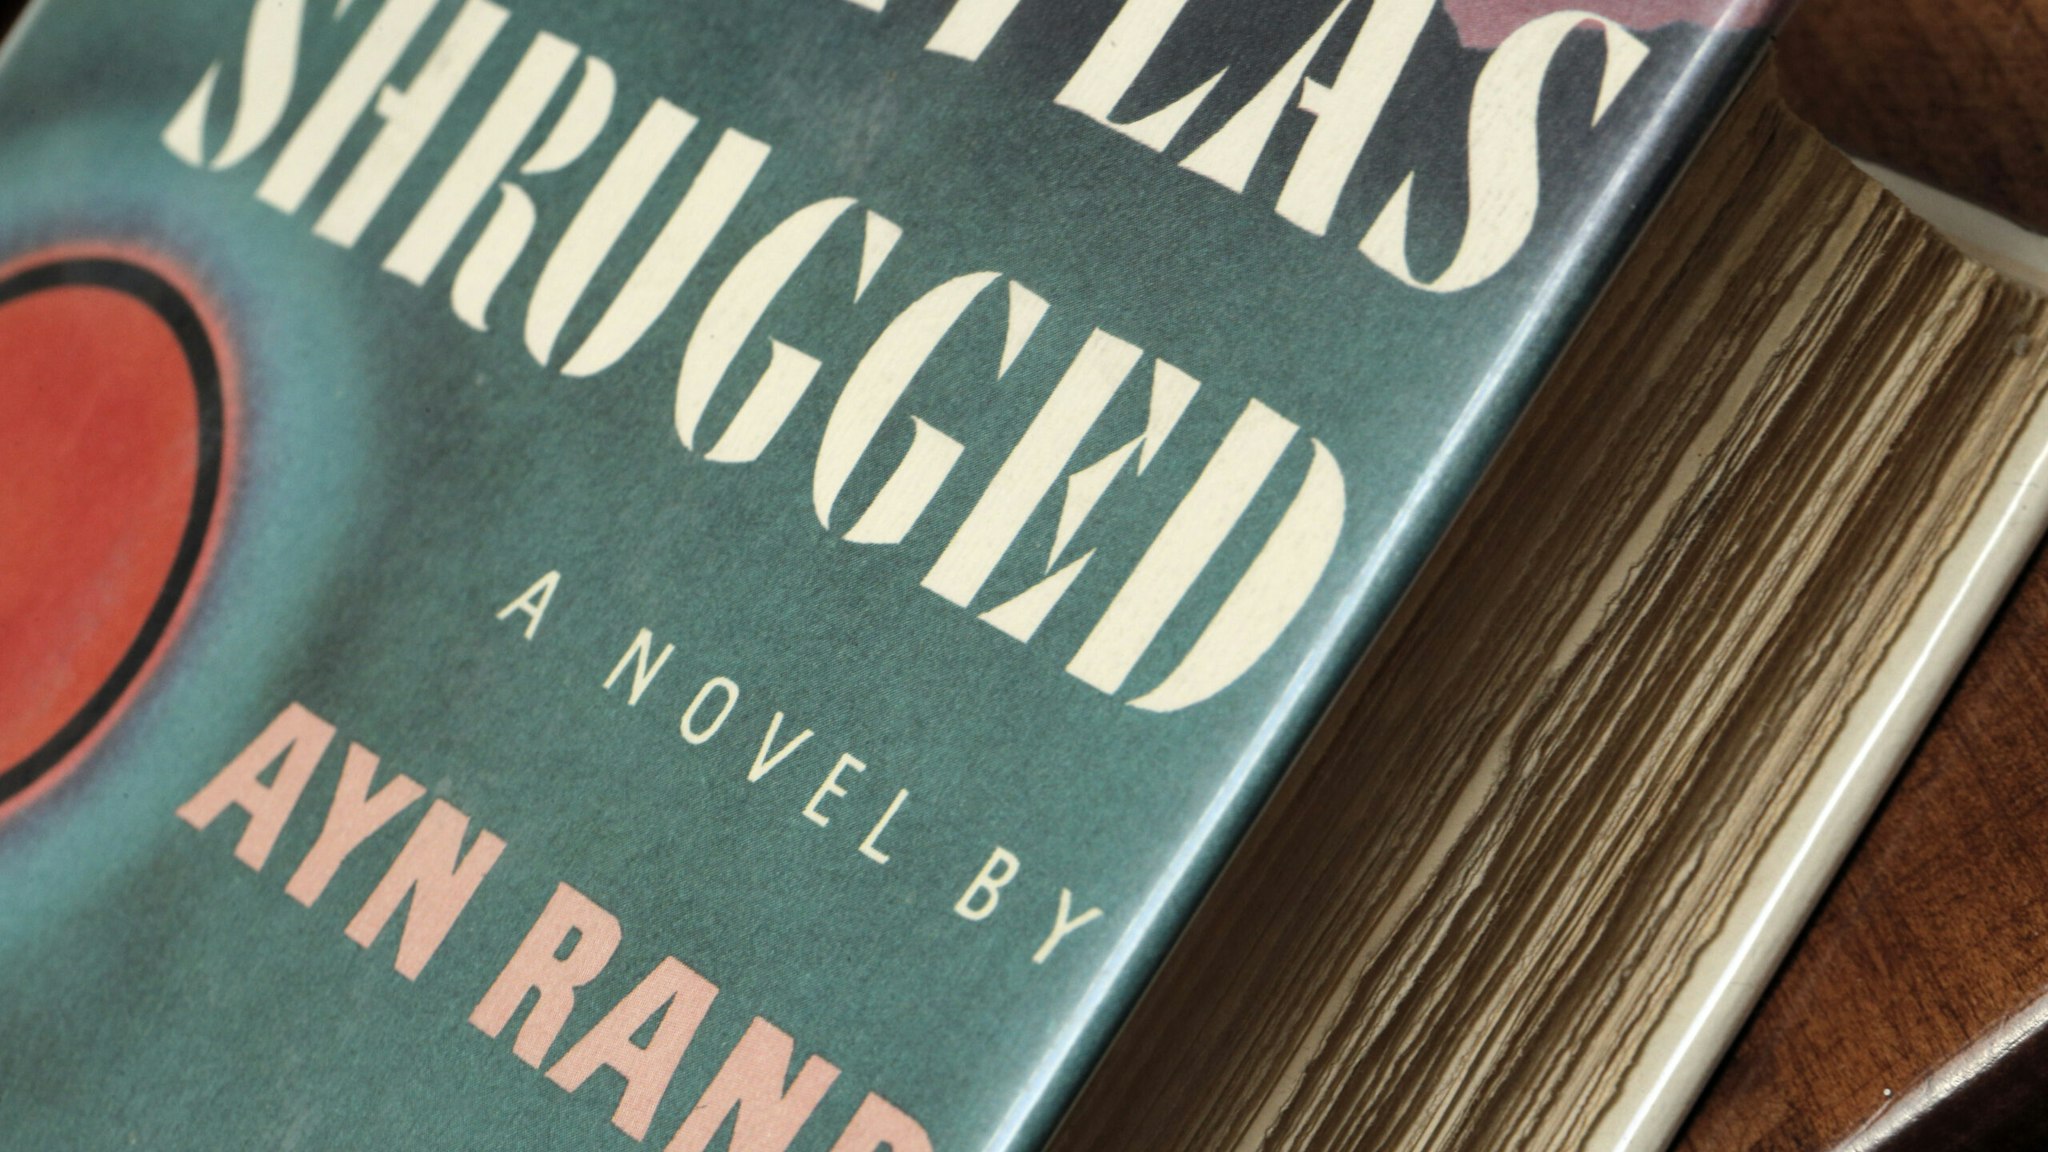 Daily Wire co-CEO Jeremy Boreing announced in a livestreamed townhall address Thursday that the company has acquired exclusive feature film and television series rights to develop and produce an adaptation of Ayn Rand’s ATLAS SHRUGGED.